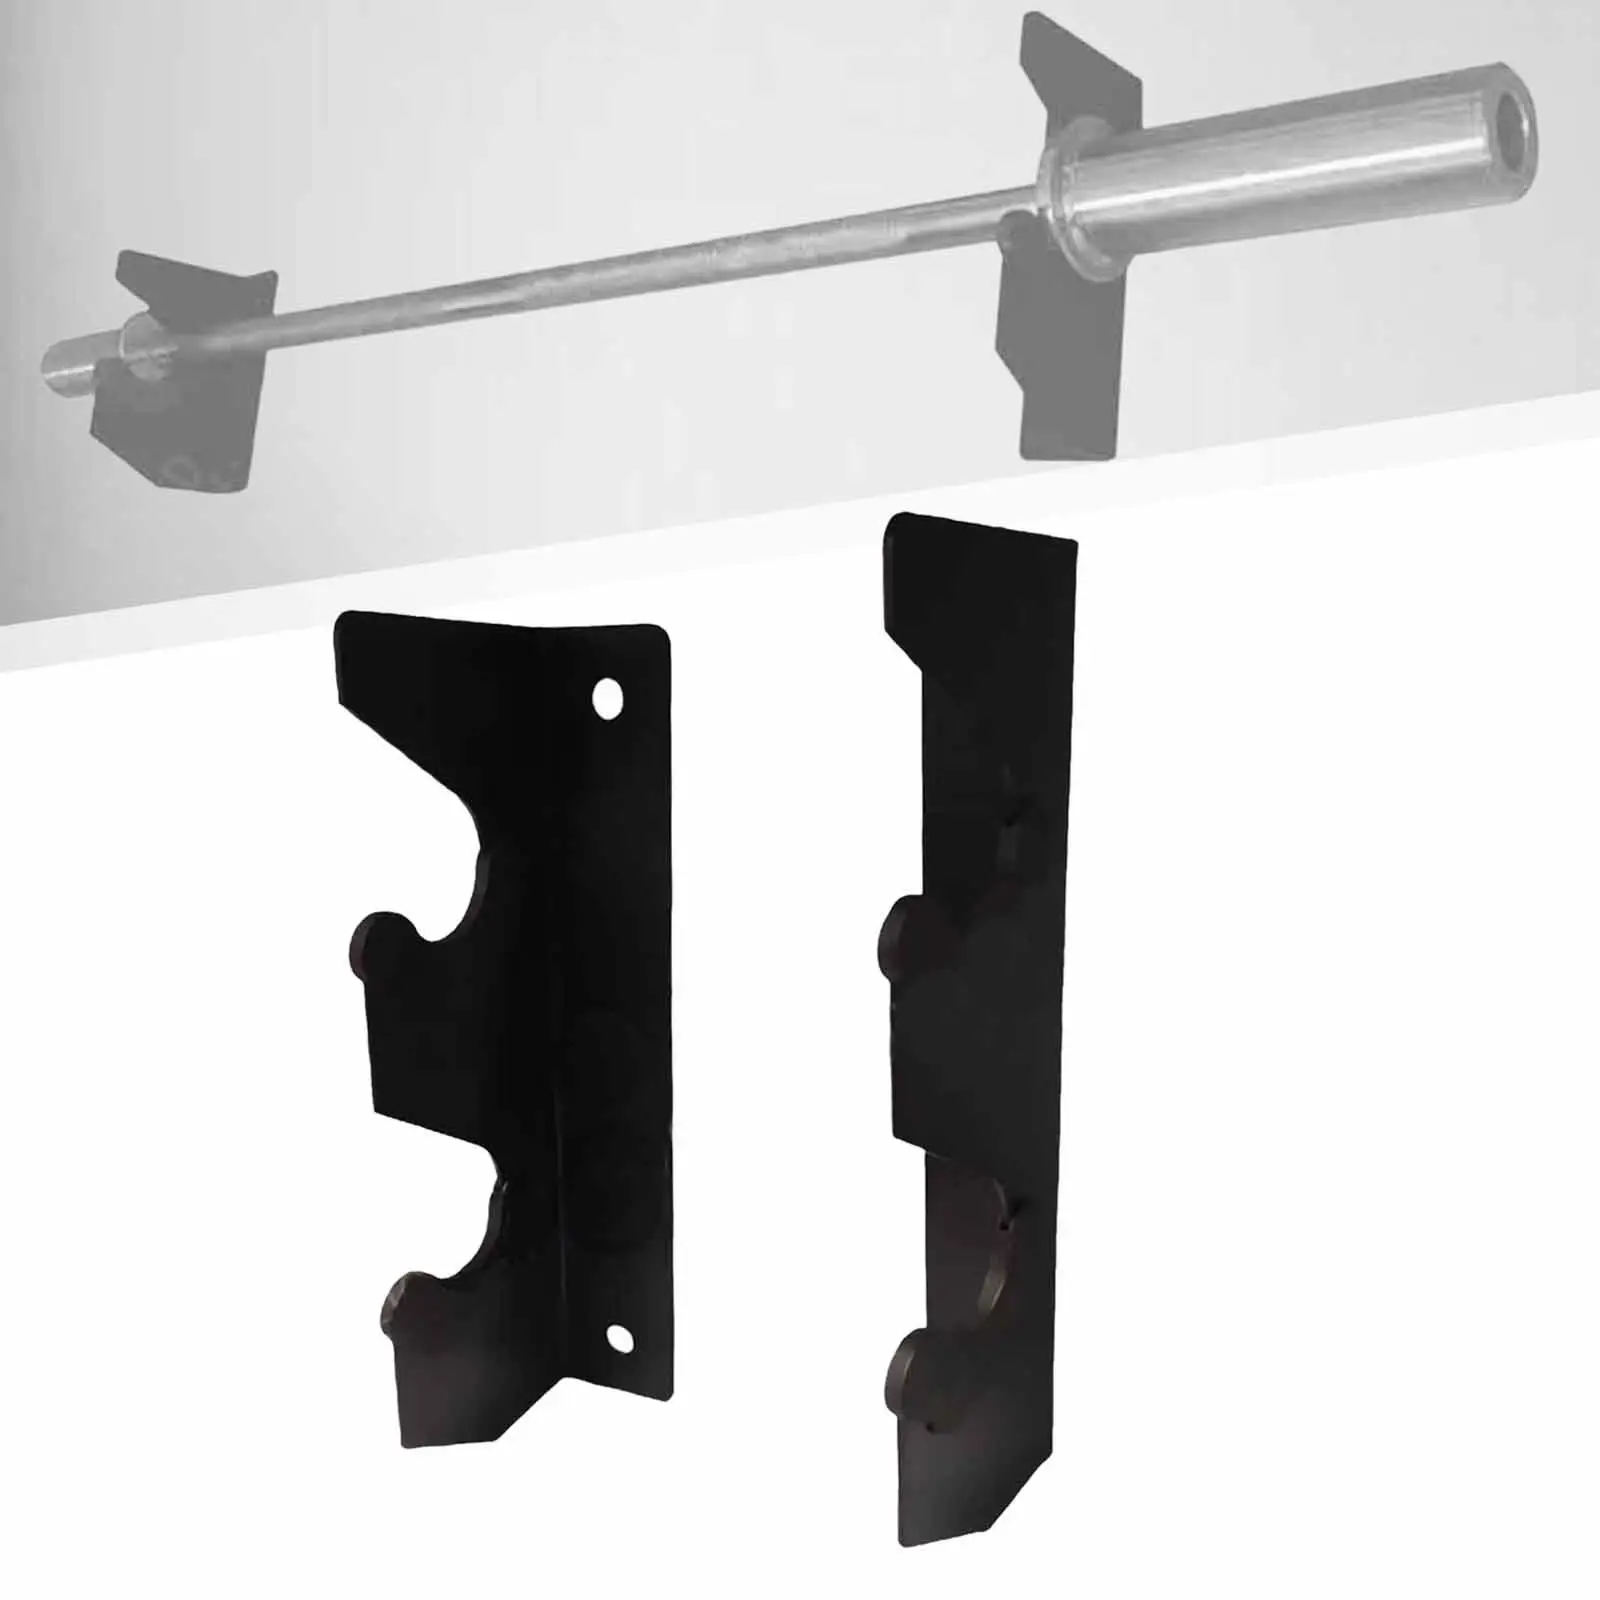 2Pcs Wall Mounted Barbell Rack Barbell Storage Metal Stand Workout Gear Barbell